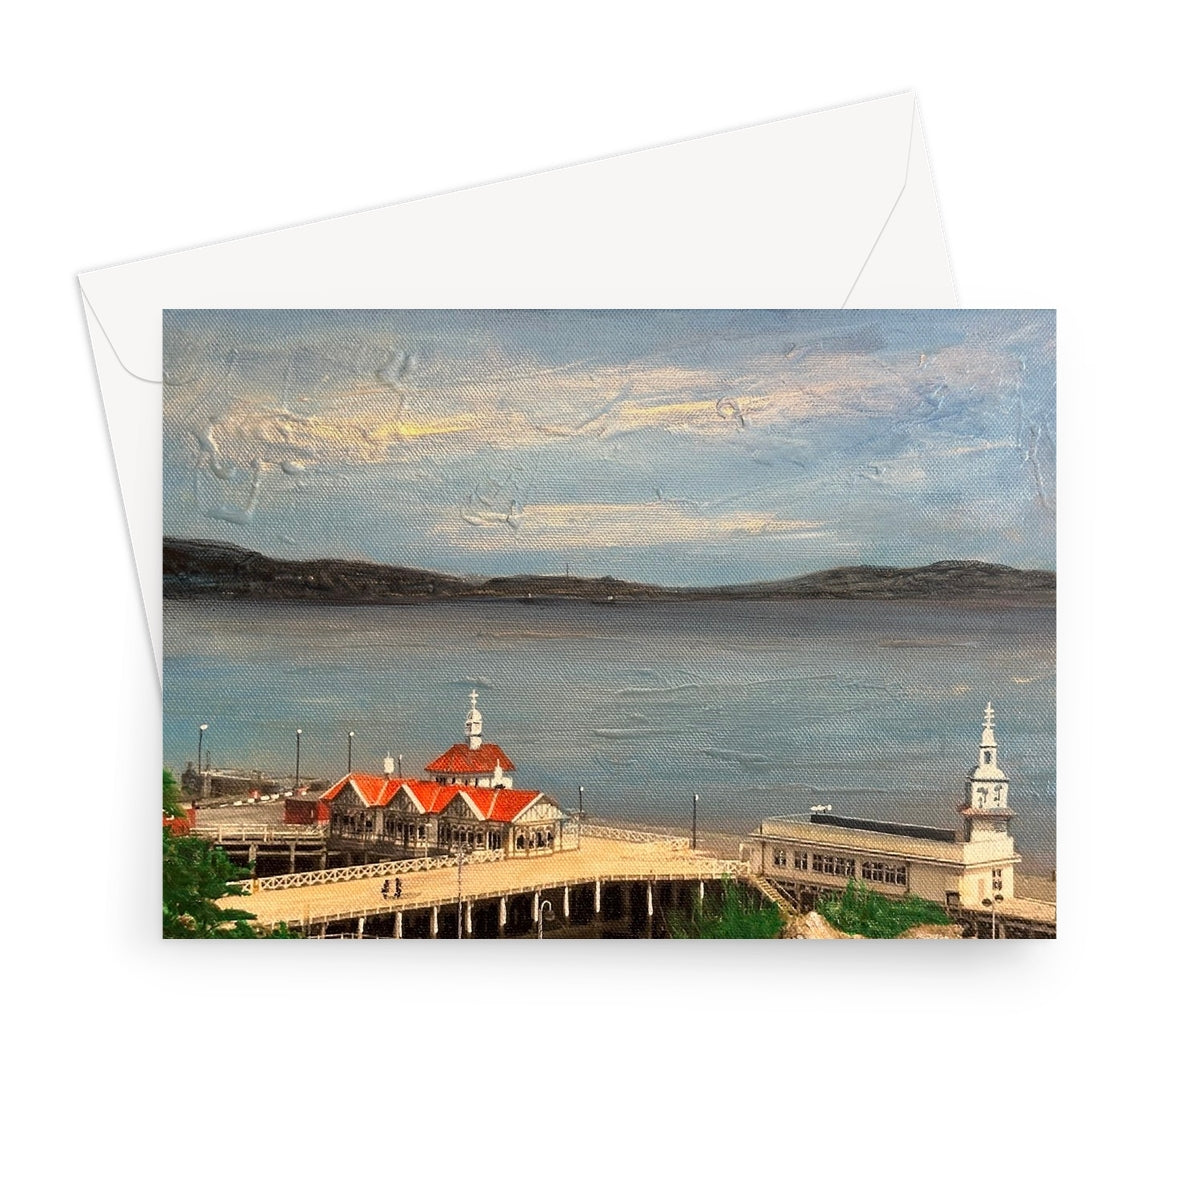 Looking From Dunoon Art Gifts Greeting Card-Stationery-River Clyde Art Gallery-7"x5"-1 Card-Paintings, Prints, Homeware, Art Gifts From Scotland By Scottish Artist Kevin Hunter